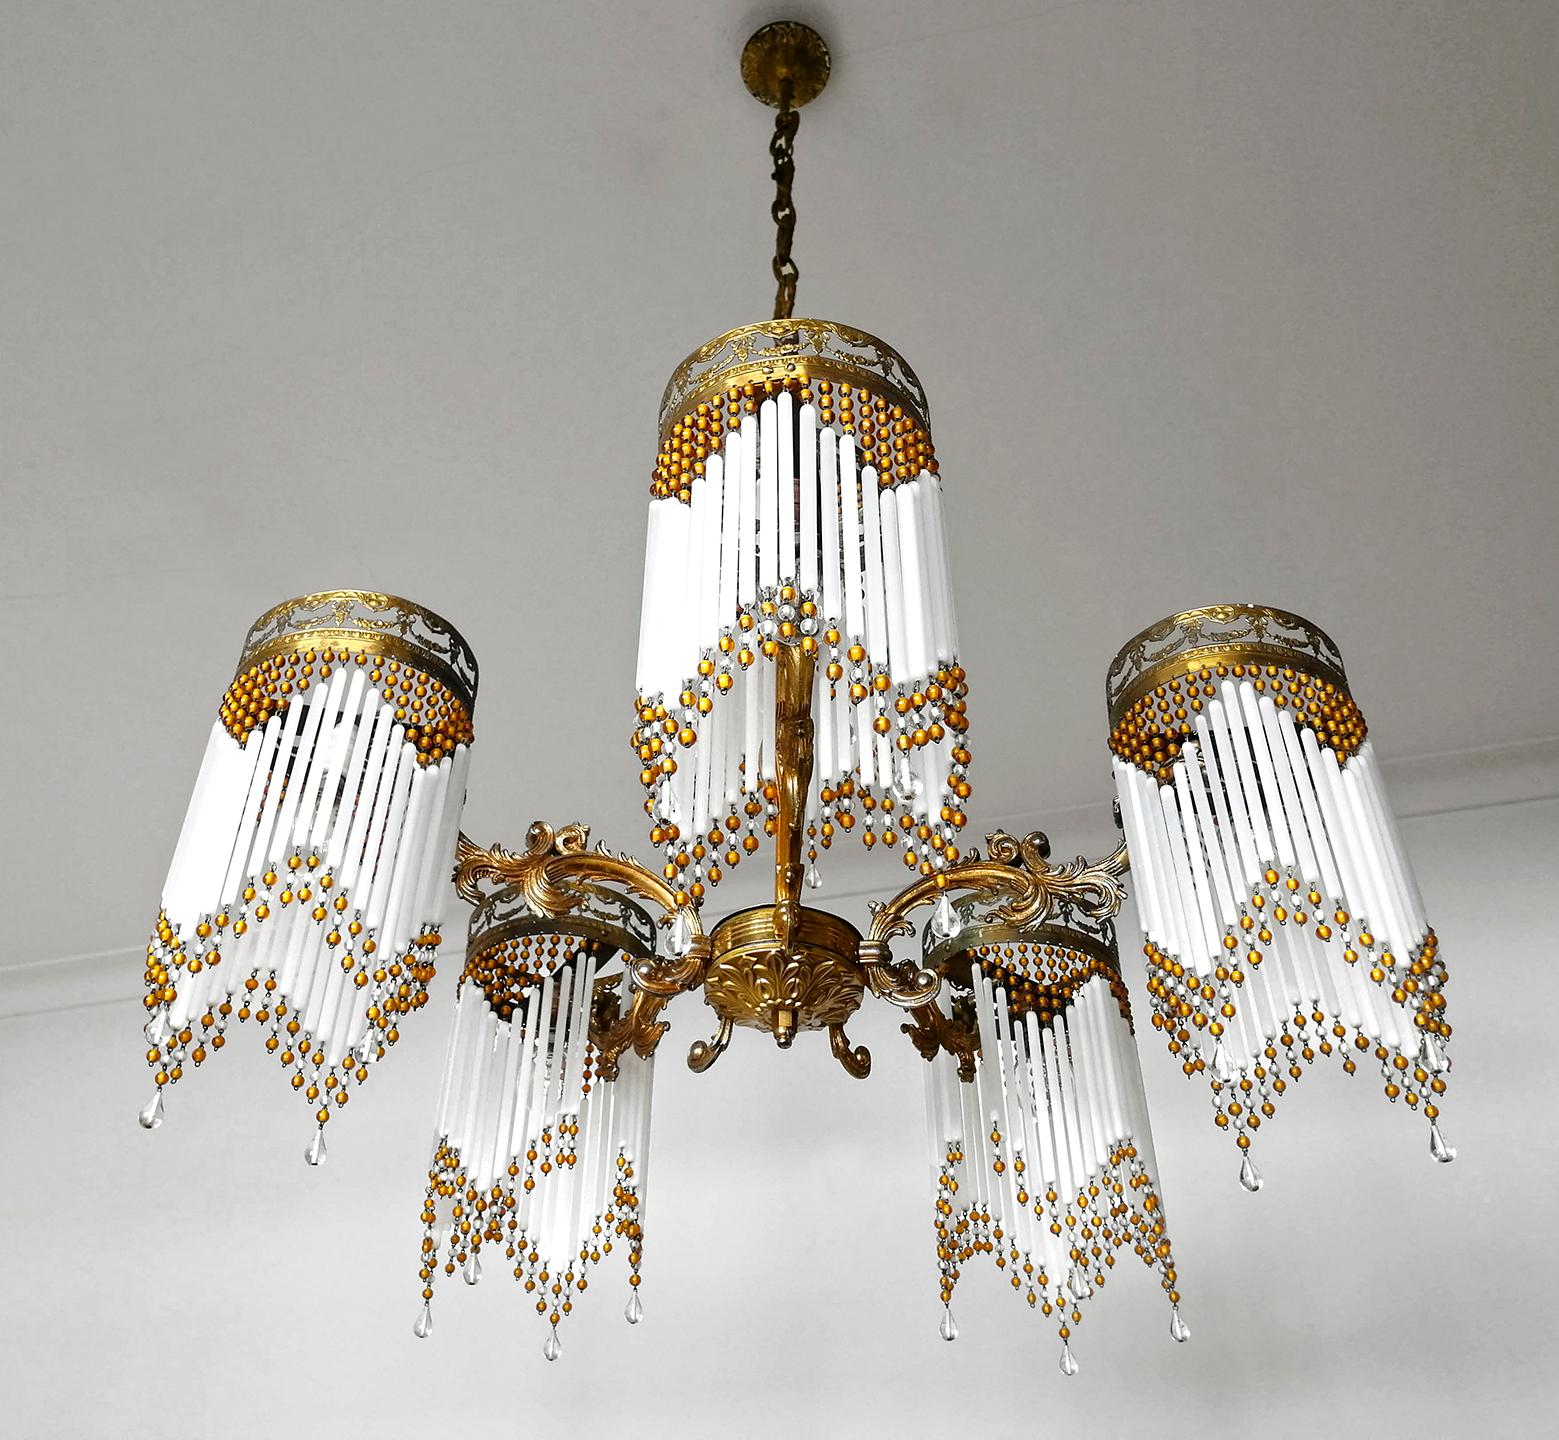 20th Century French Art Deco and Art Nouveau Amber Beaded Fringe and Gilt Ornate Chandelier